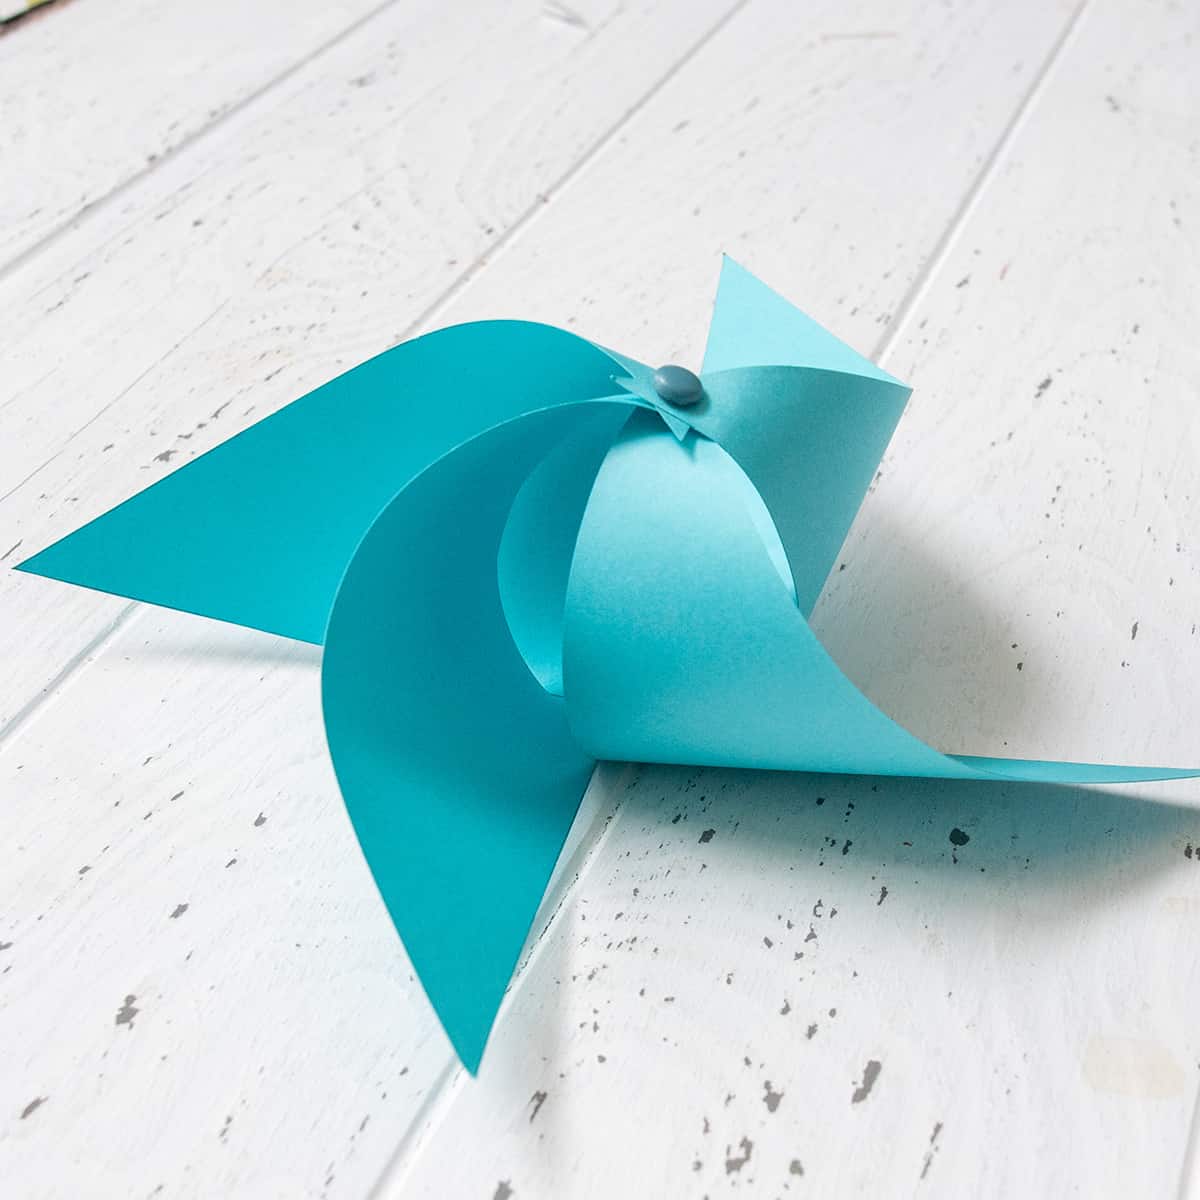 Colorful craft paper partially folded into DIY pinwheel shape on white surface.